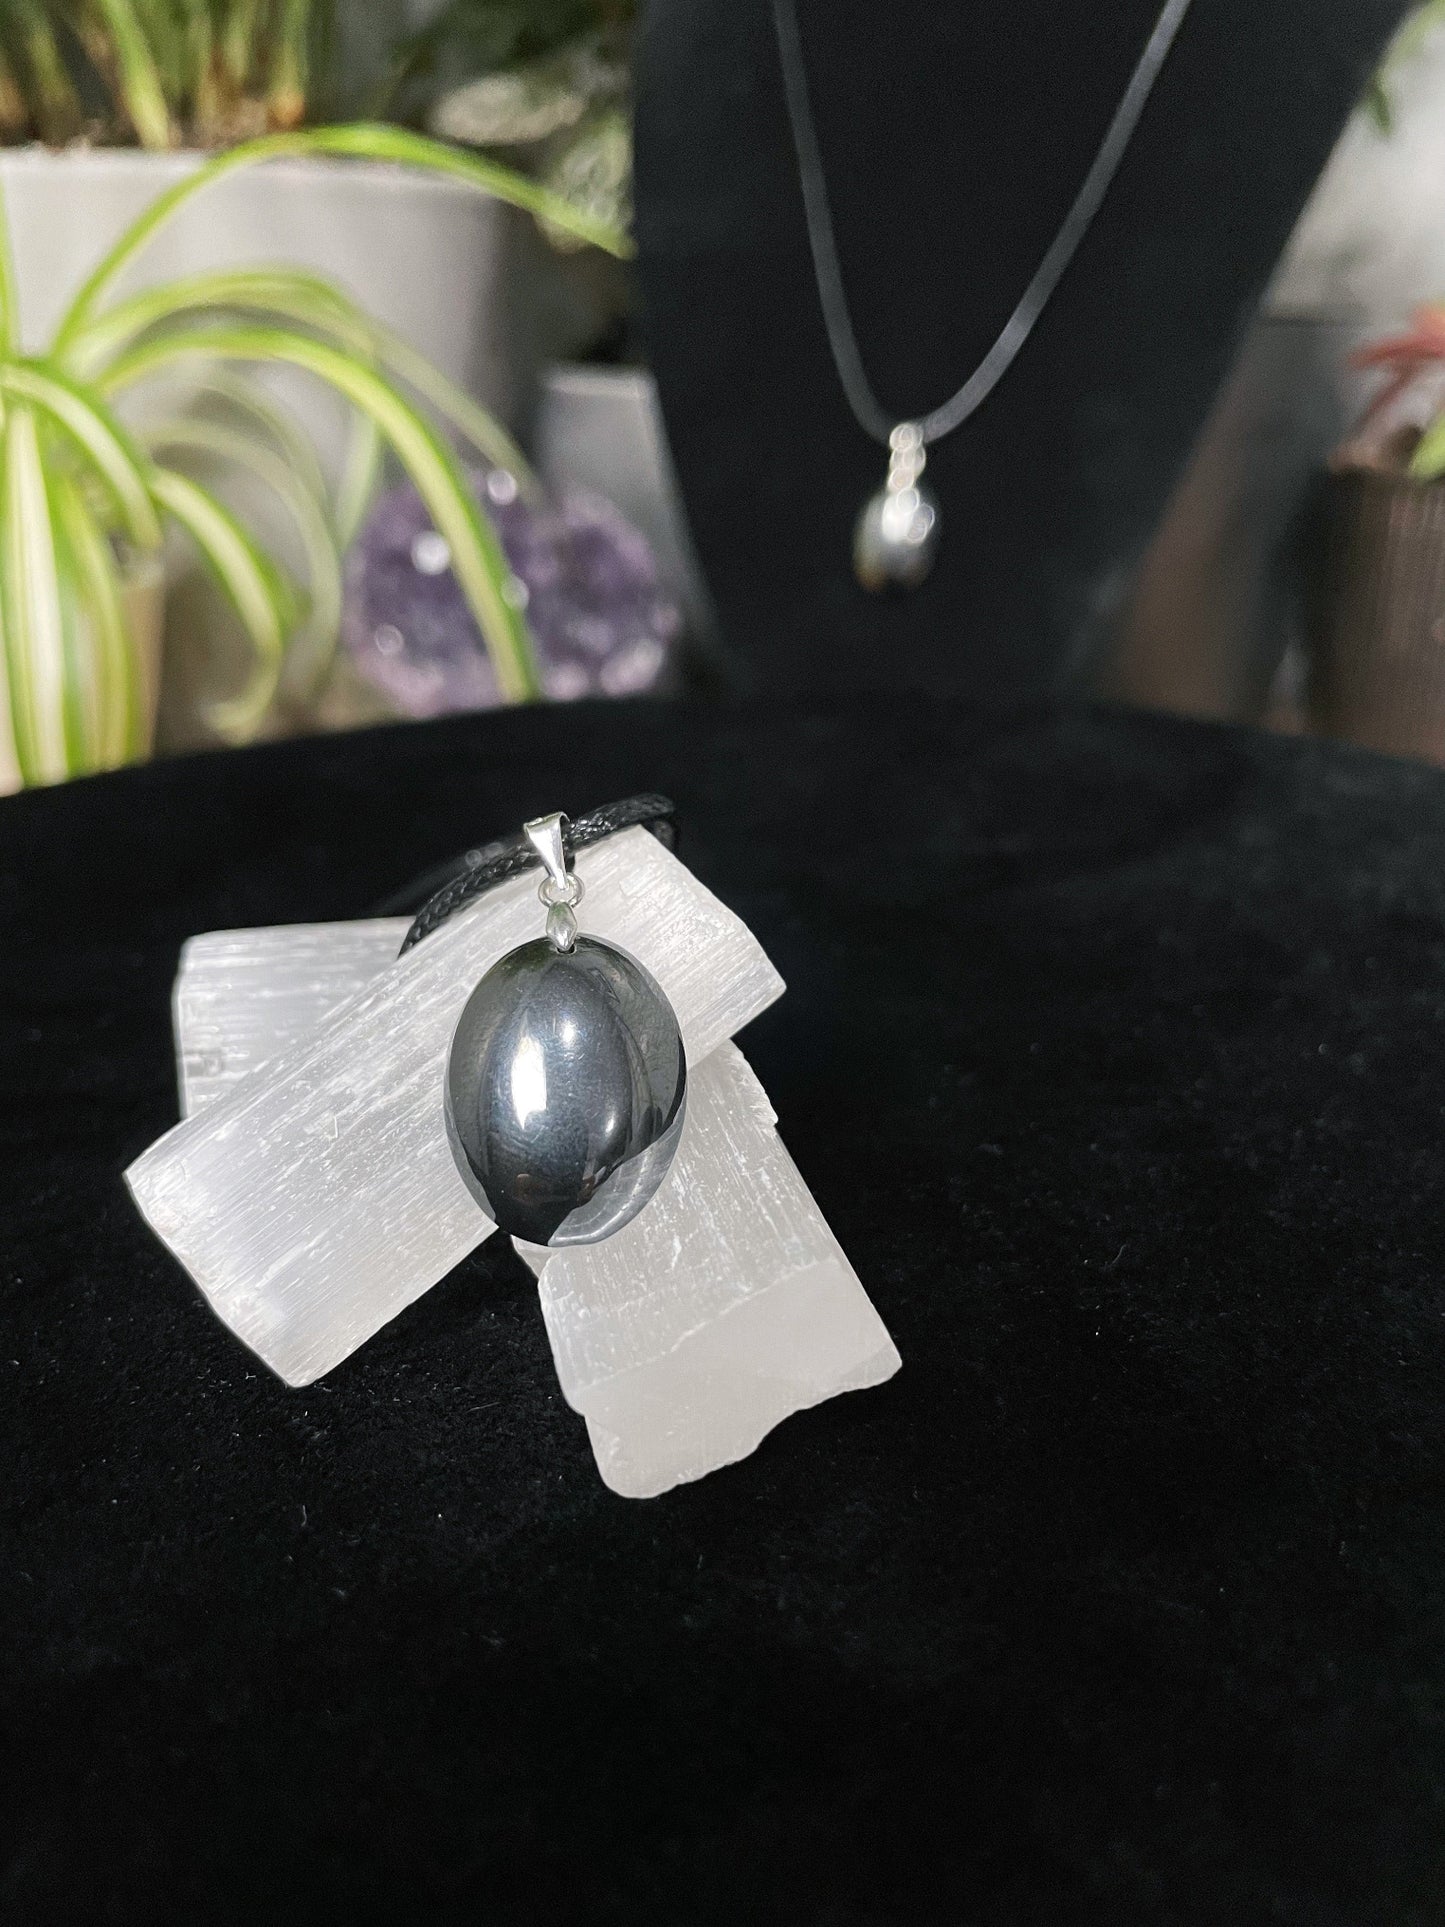 An image of a terahertz oval shaped pendant on a necklace. It sits atop some selenite chunks and a black velvet surface.